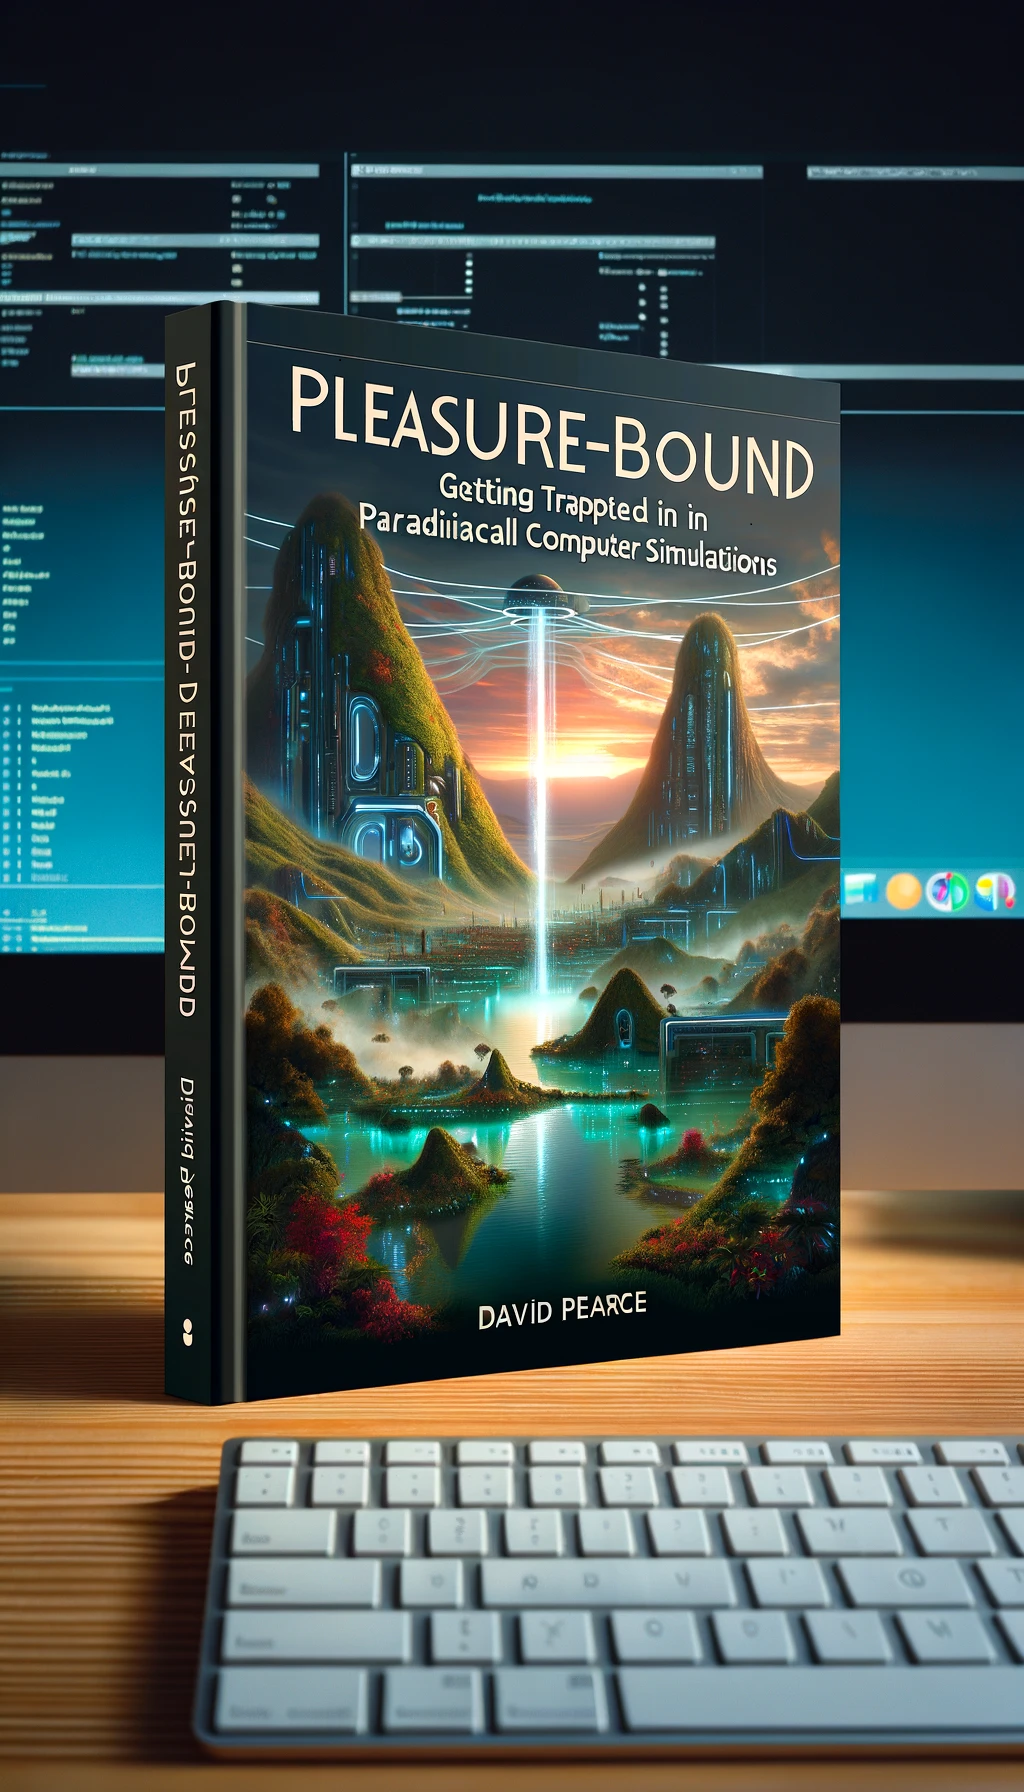 Pleasure-Bound:  Getting Trapped in Paradisiacal Computer Simulations by David Pearce